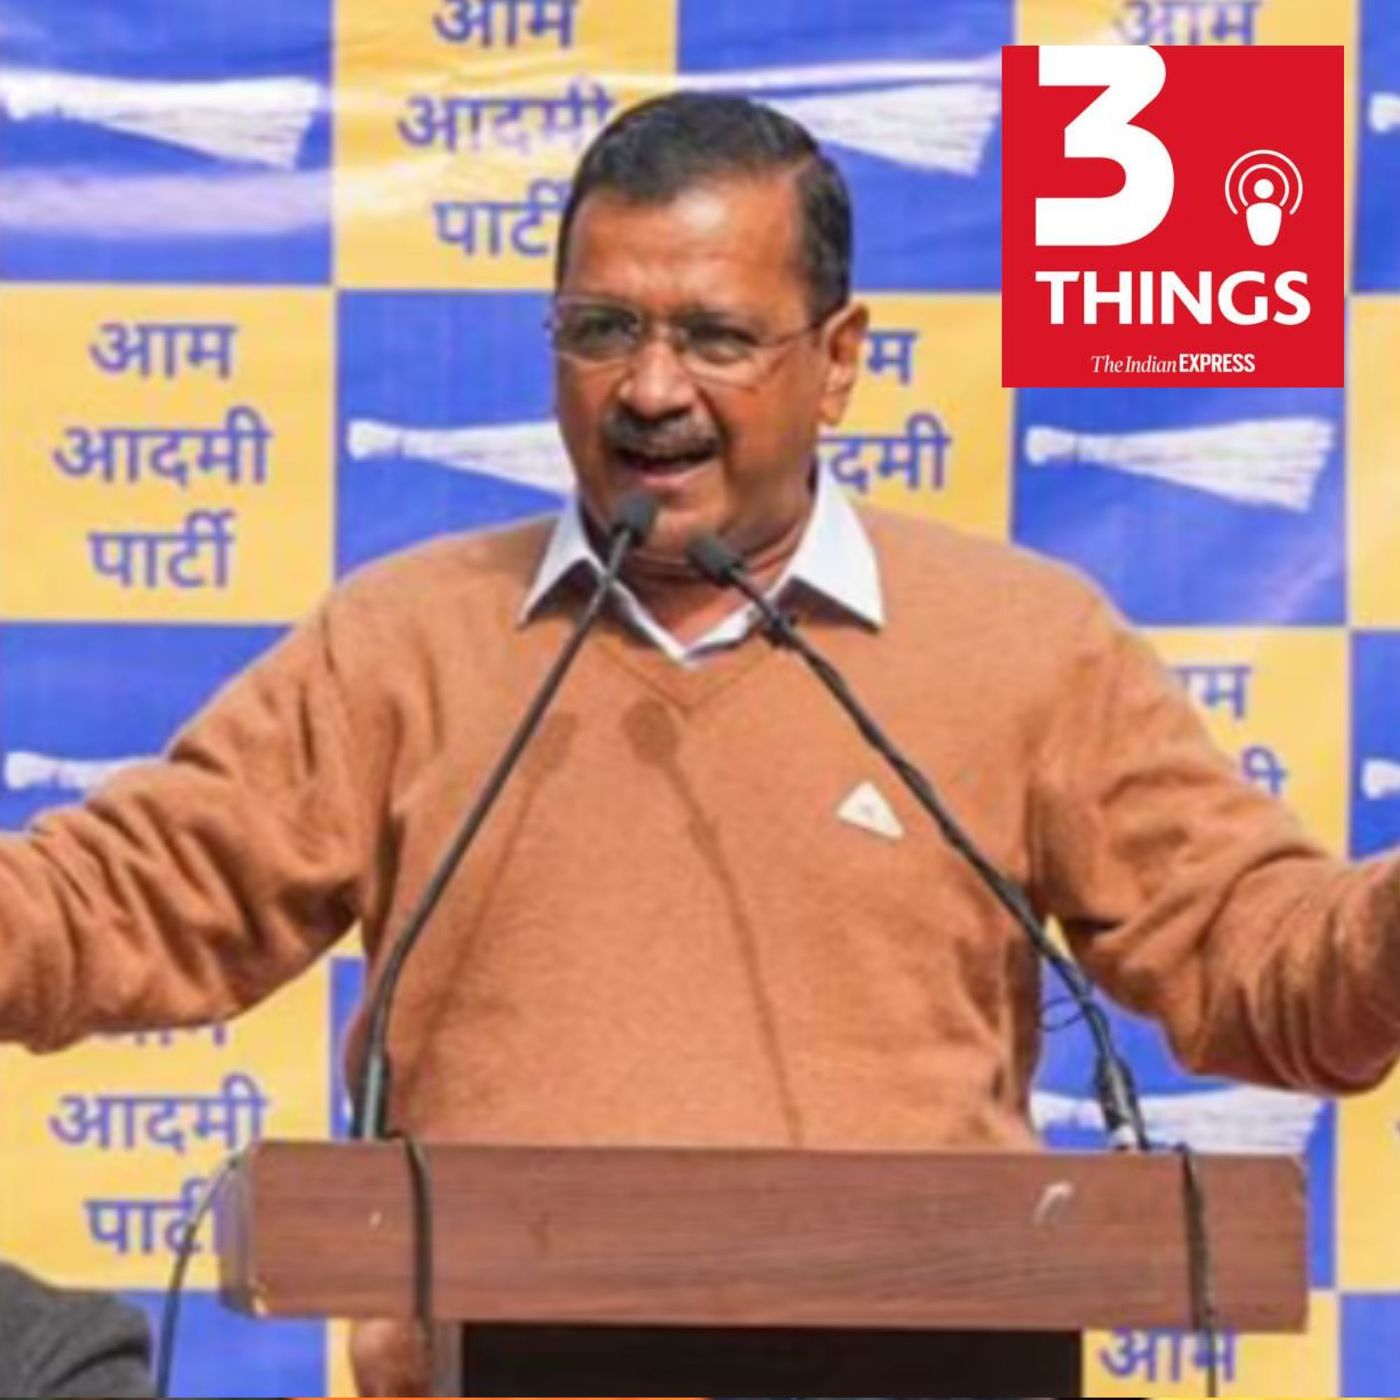 Kejriwal gets to campaign, tensions within NC, and over a 1000 forest fires